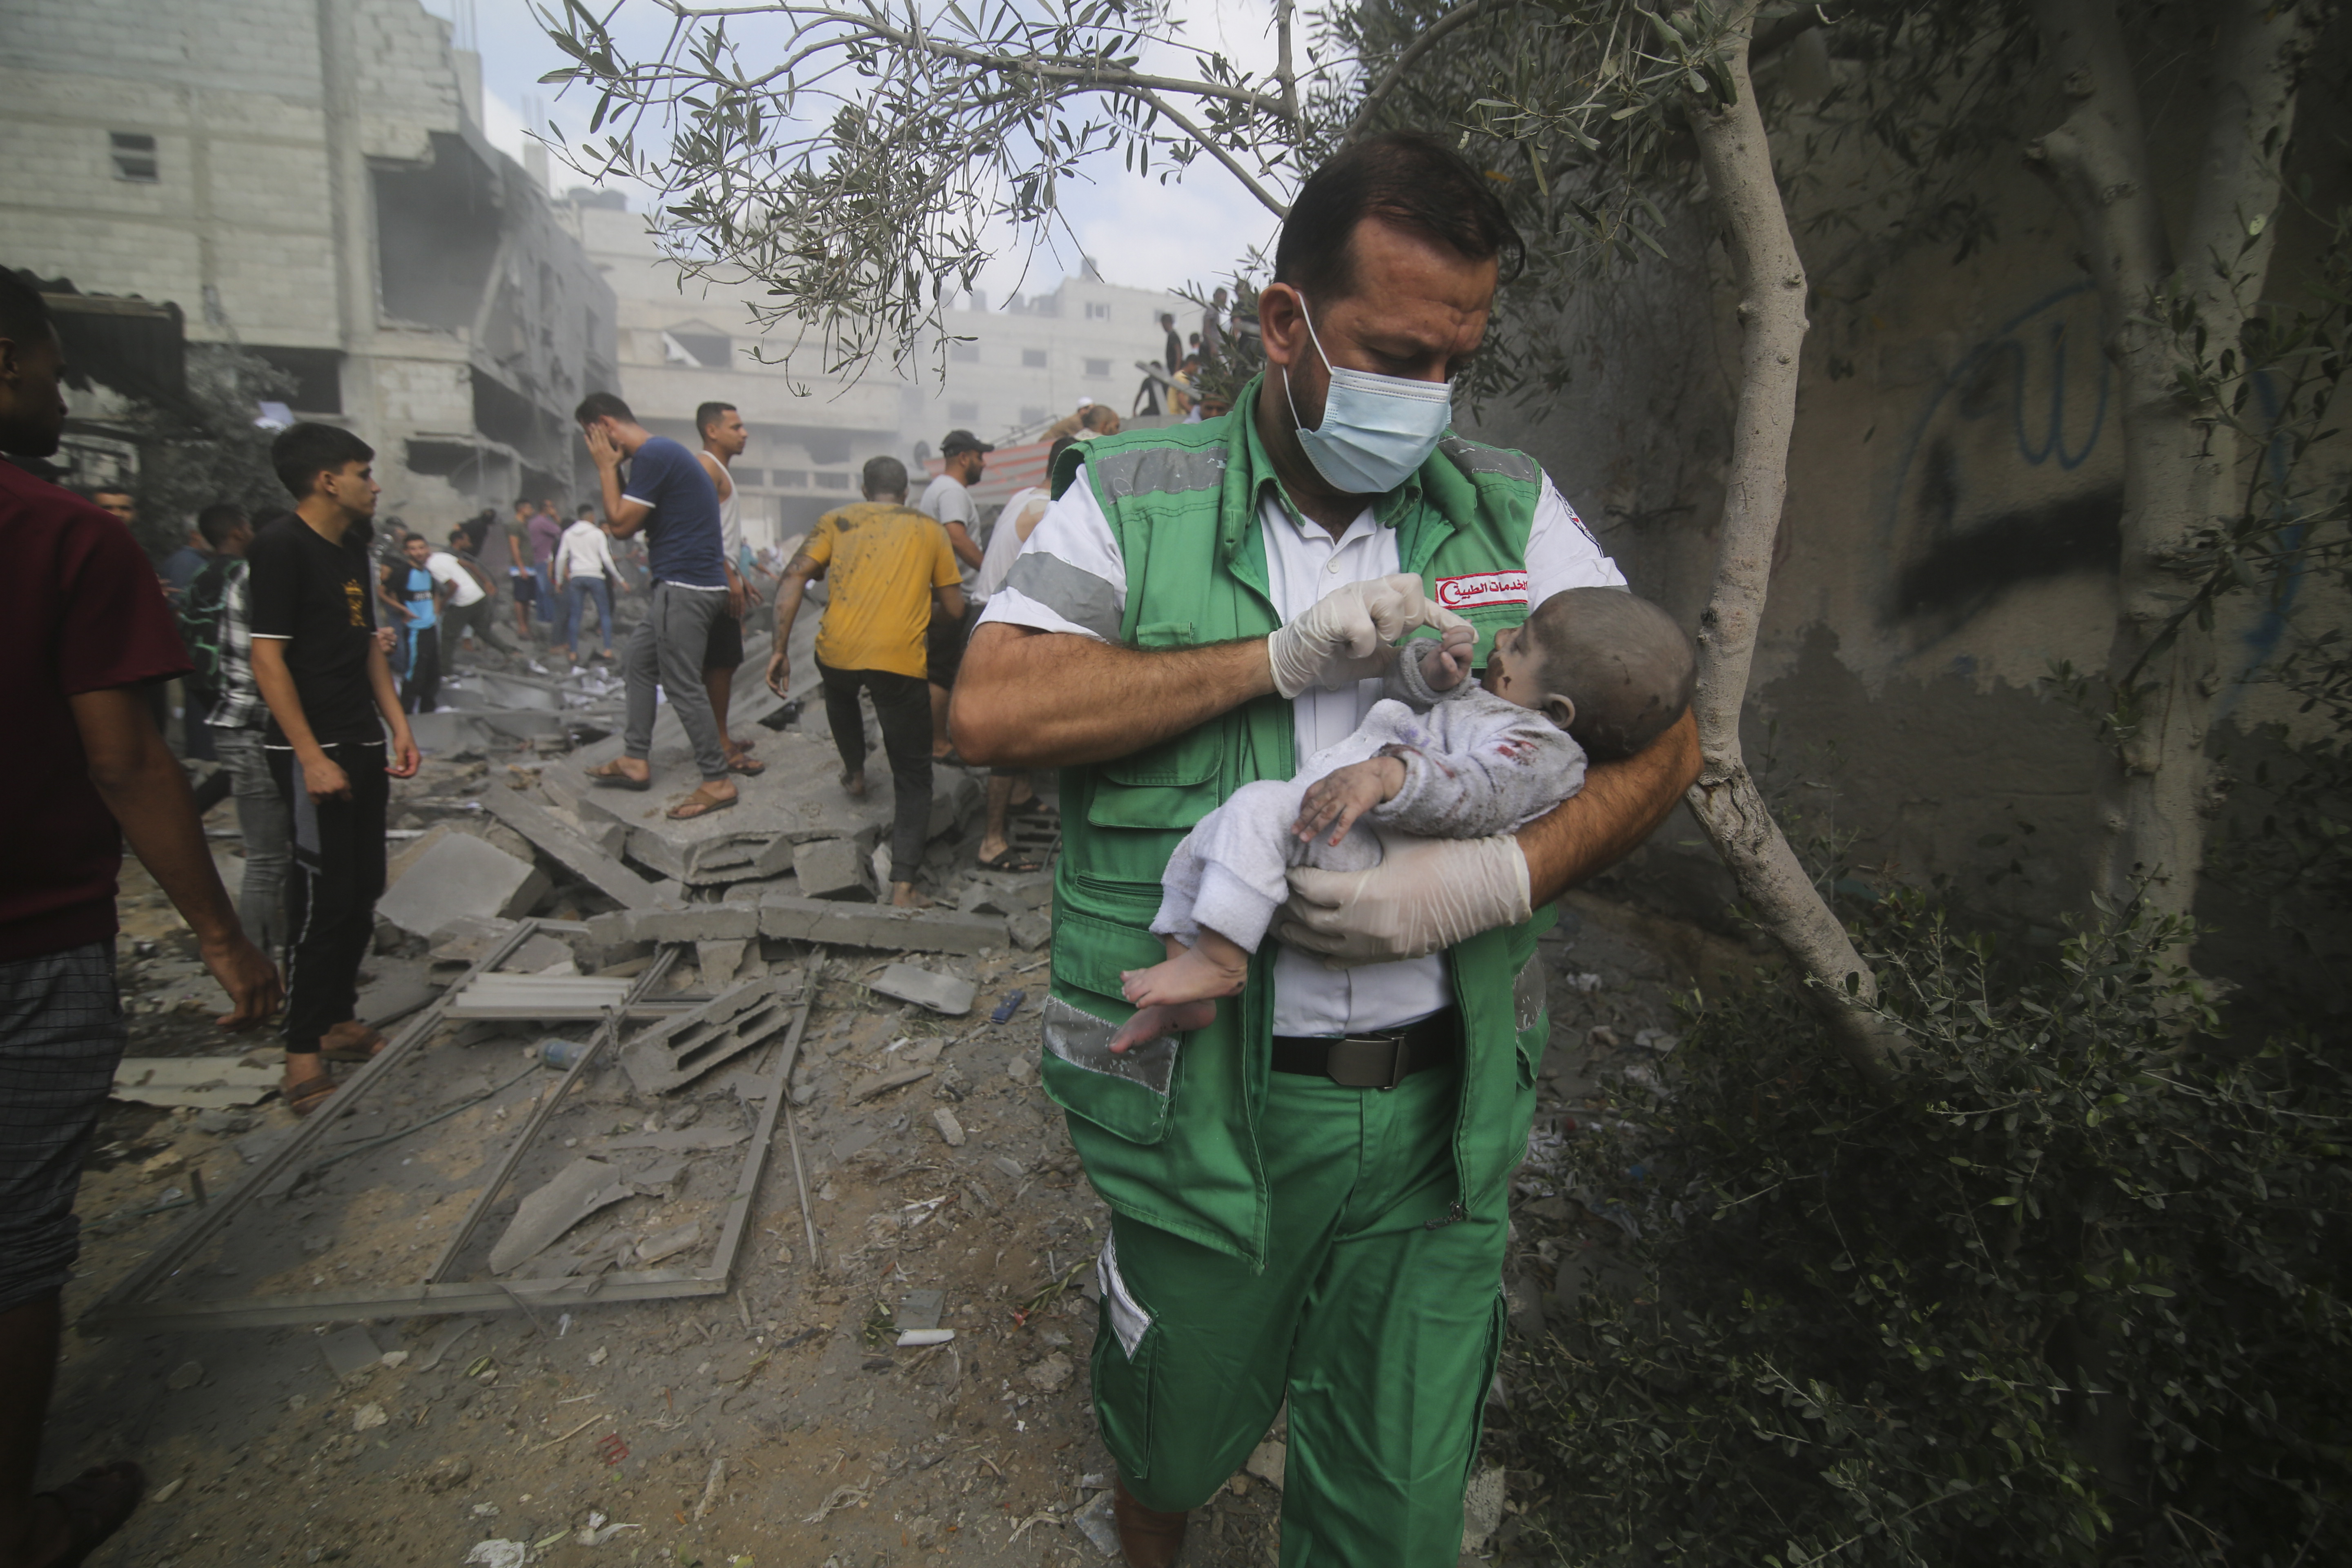 A Palestinian medic takes a baby pulled out of buildings destroyed in the Israeli bombardment